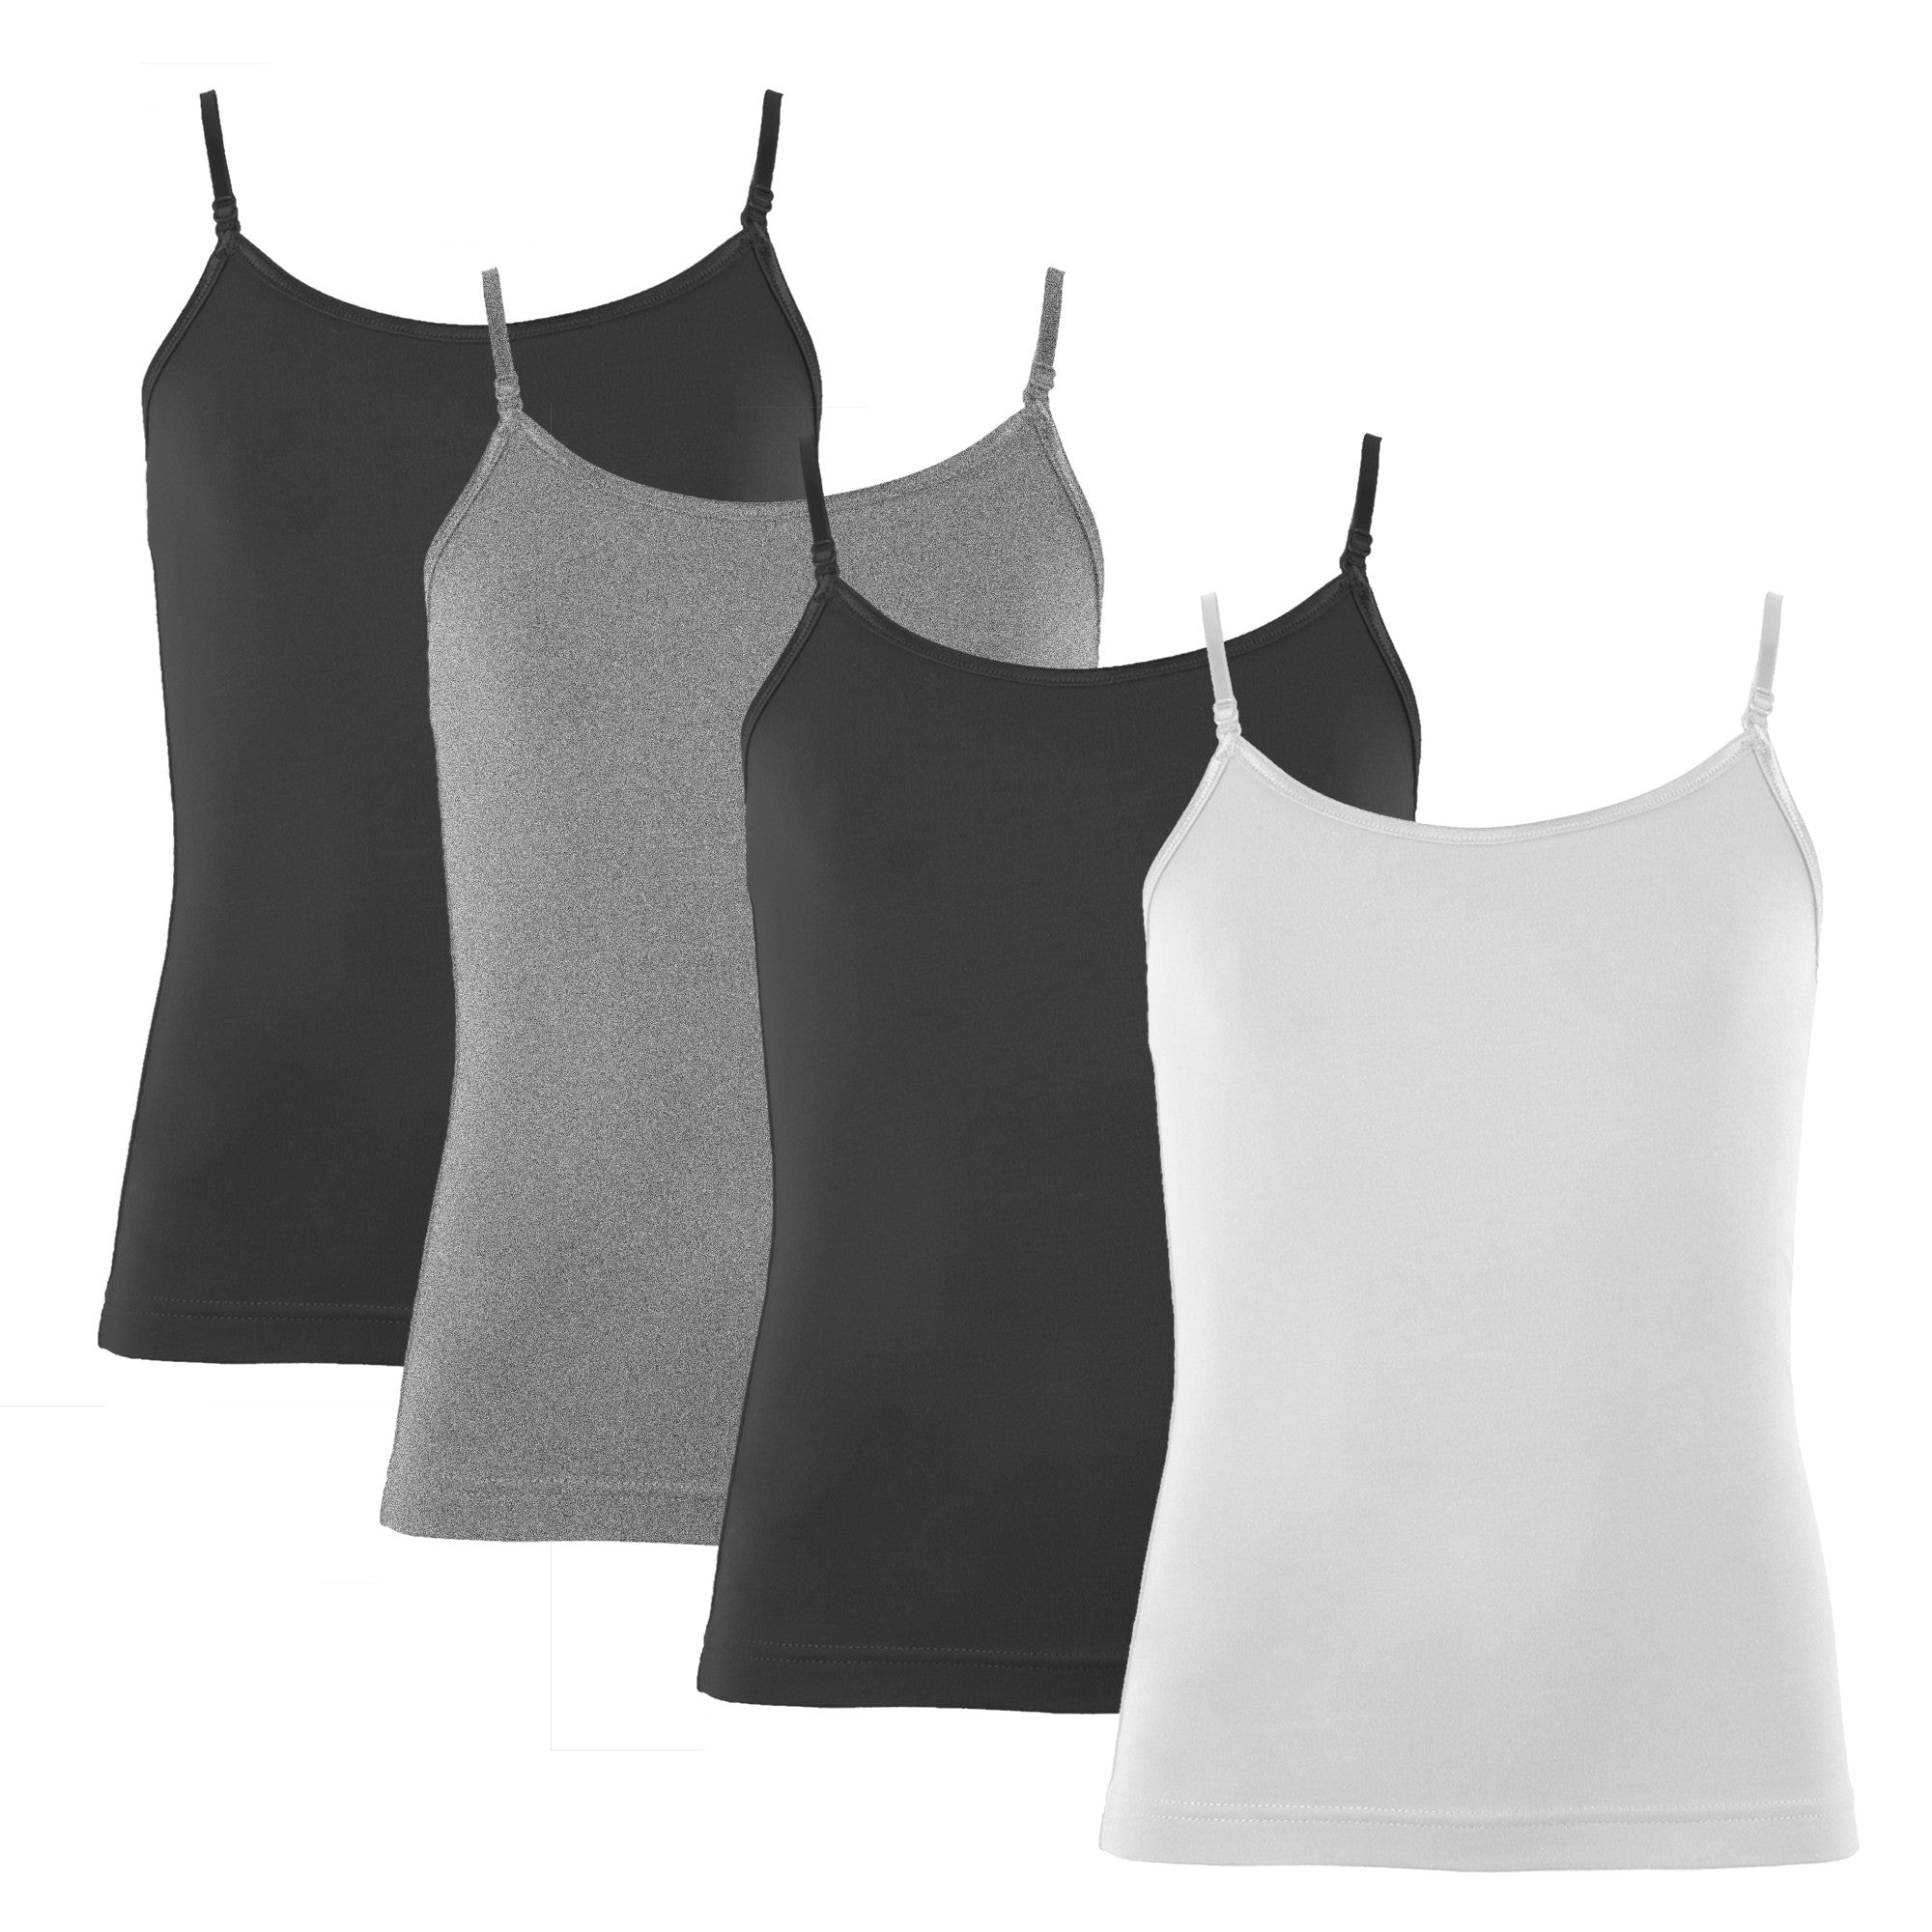 Beautyin Cotton Camisole for Women Adjustable Strap Female Tank Top, Sizes  S-2XL